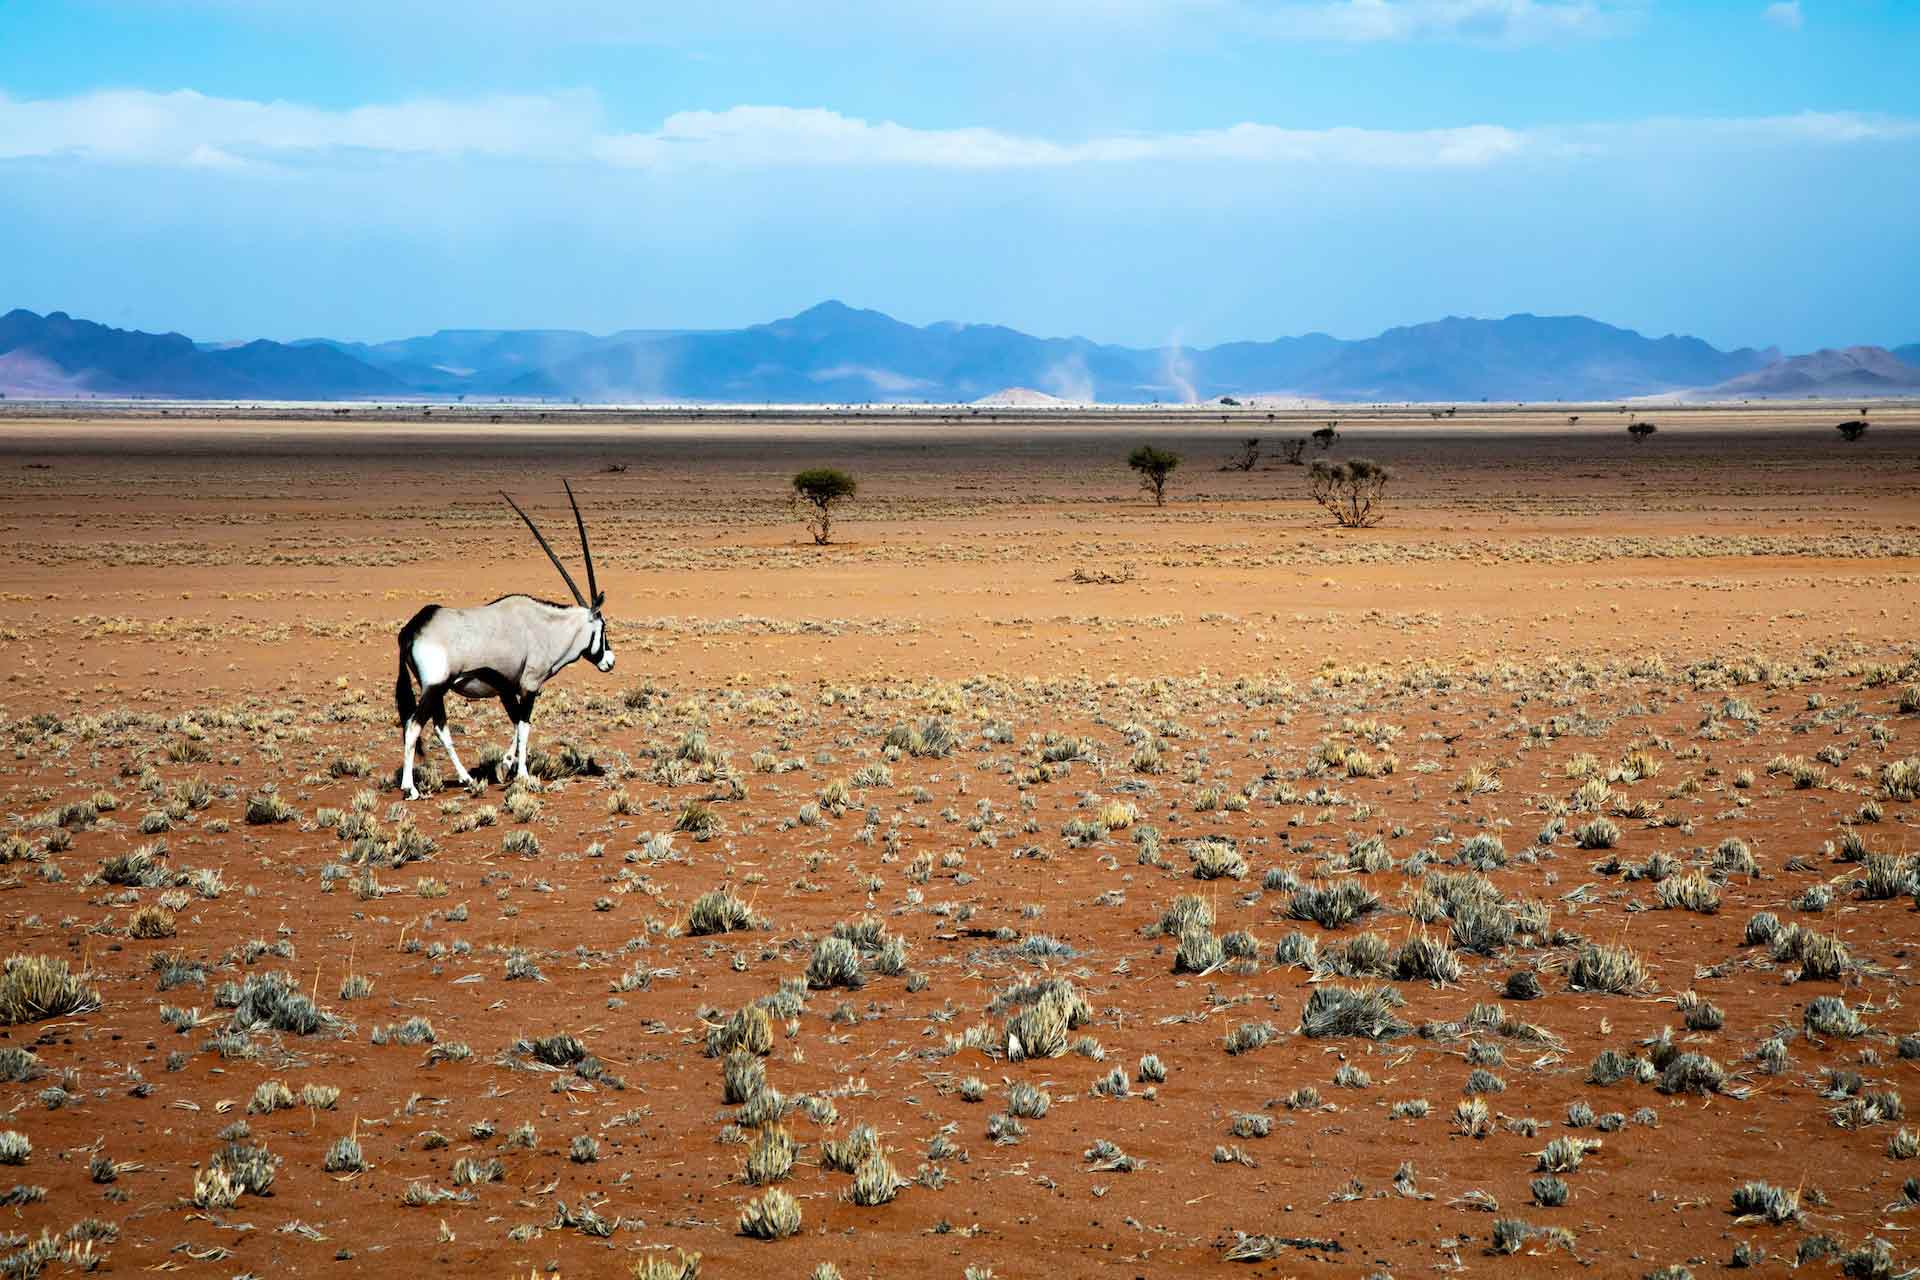 A solitary oryx standing still on top of a sand dune, Namib Desert, Namibia